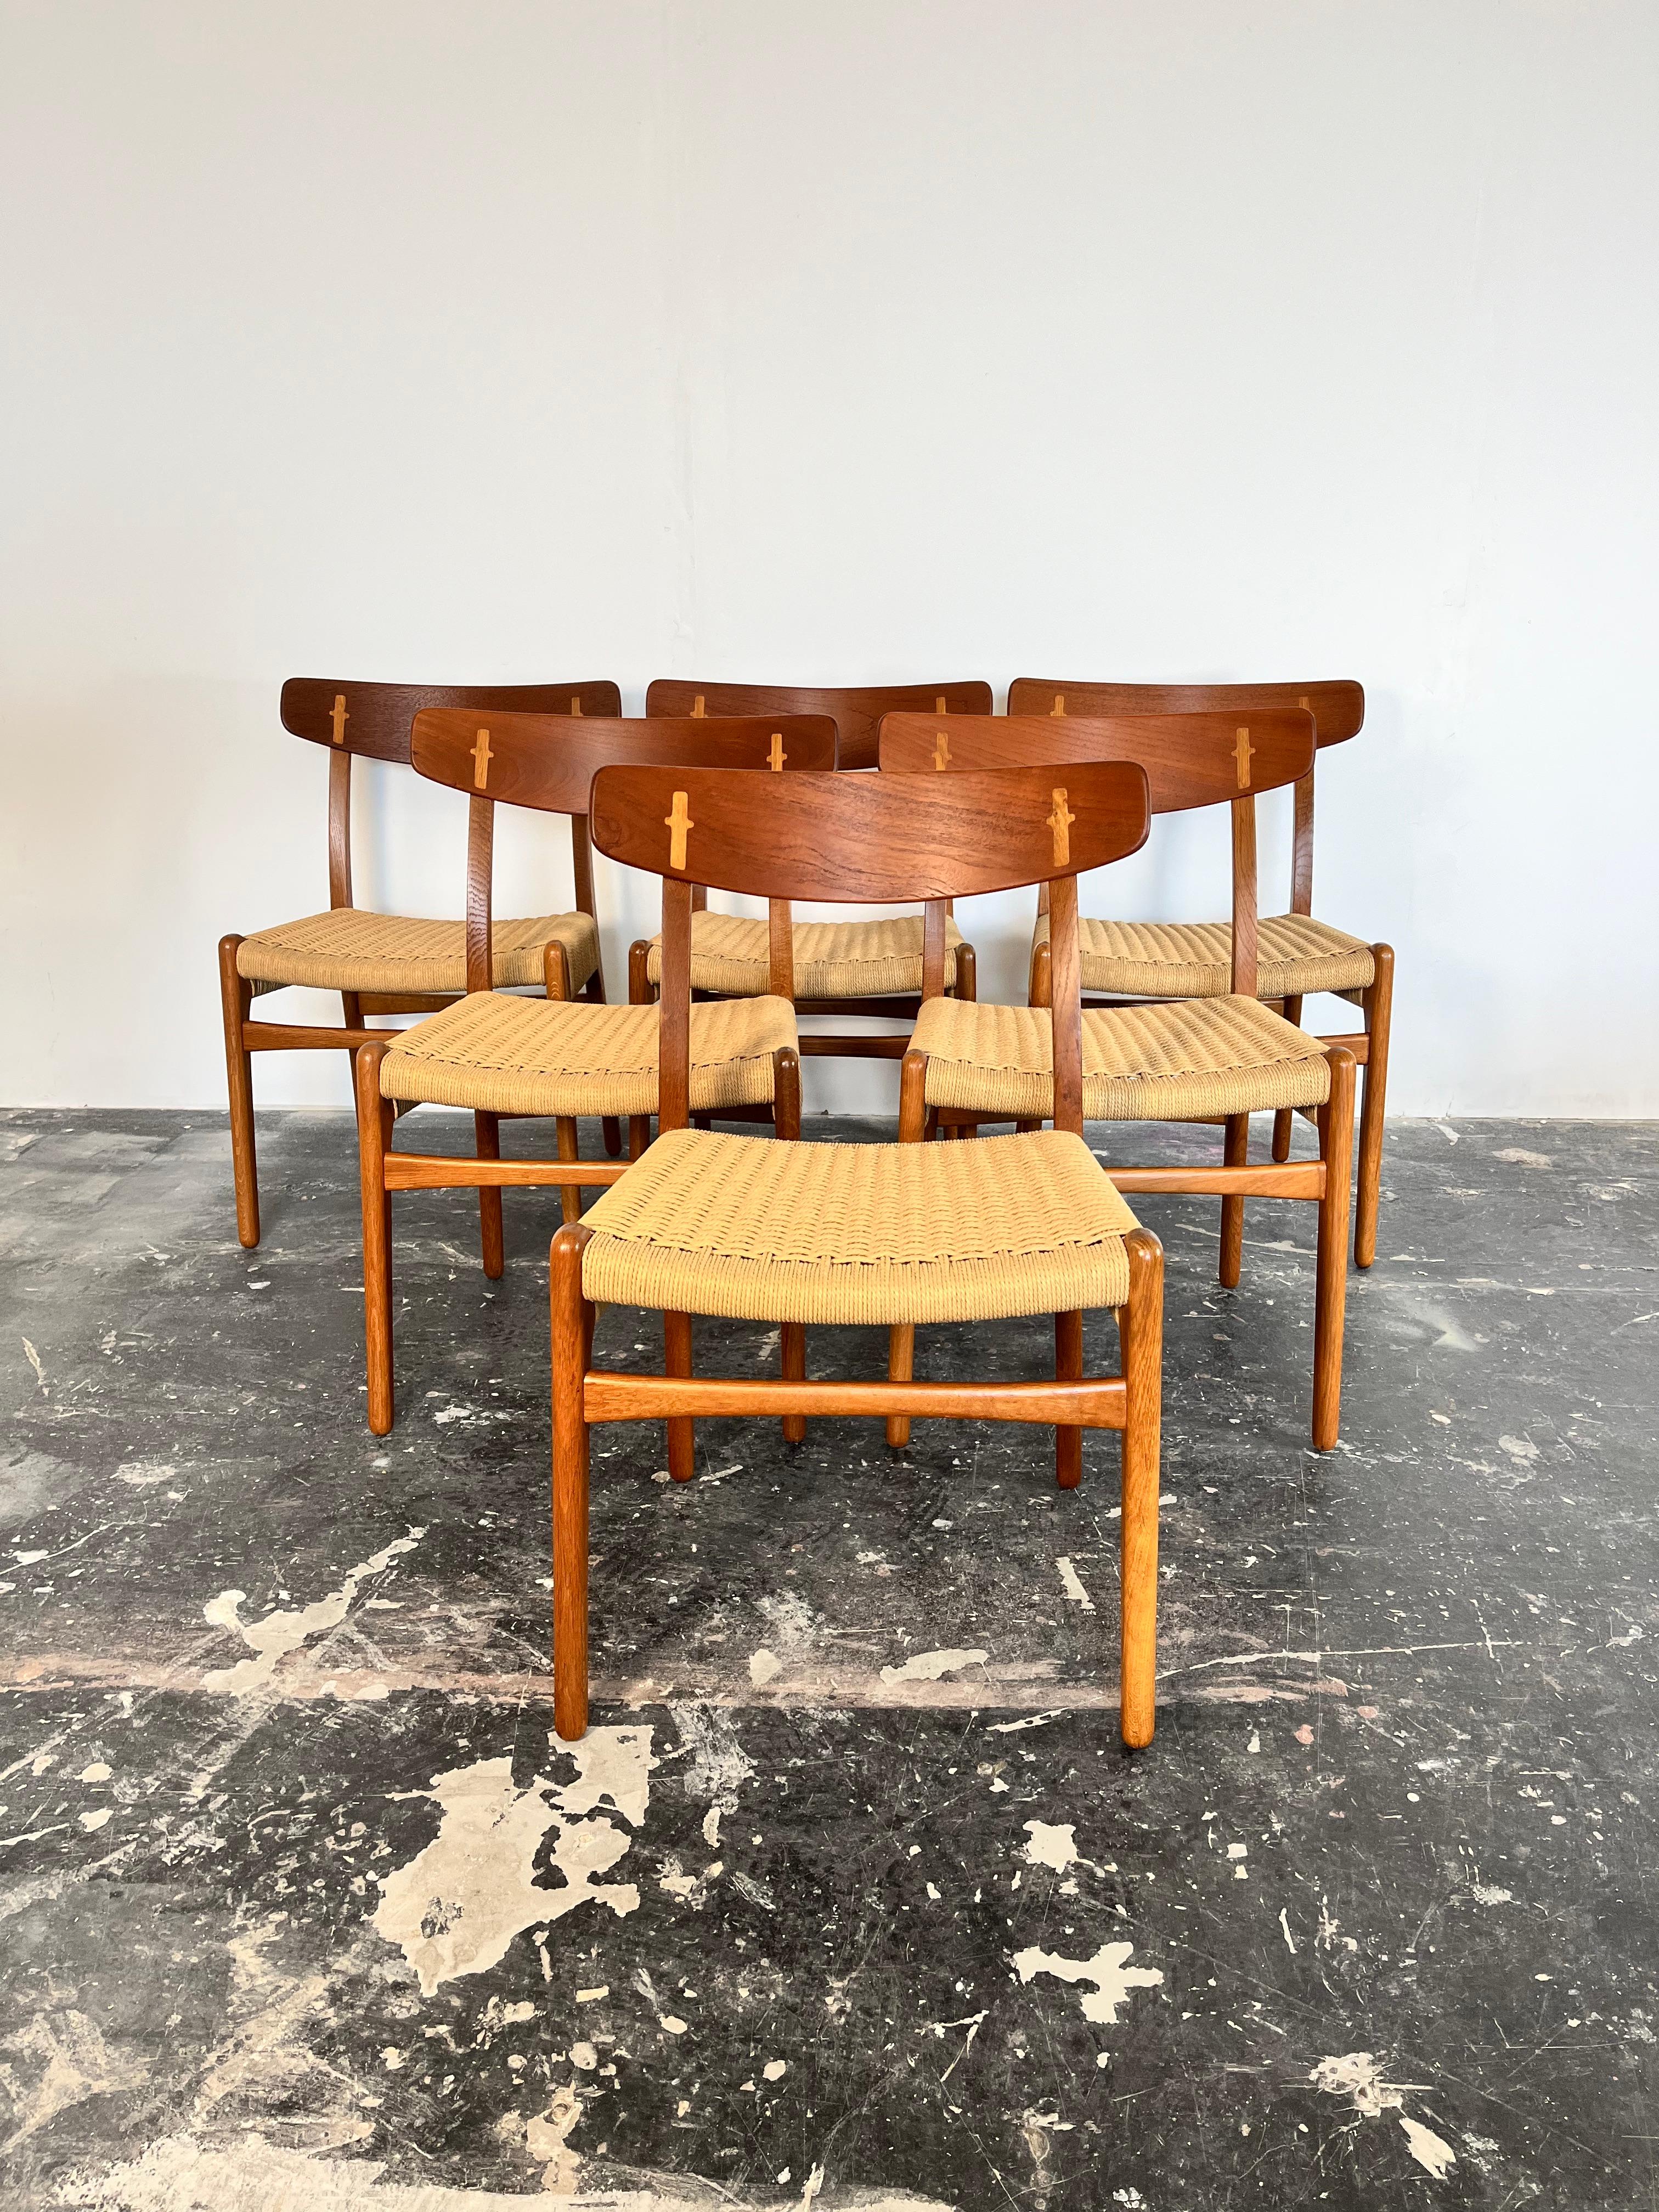 This chair is an excellent example of why Wegner's designs have set the standard. This set of 6 CH23 dining chairs designed by iconic furniture designer Hans J. Wegner for Carl Hansen & Søn in Denmark c. 1950’s have been restored to excellent